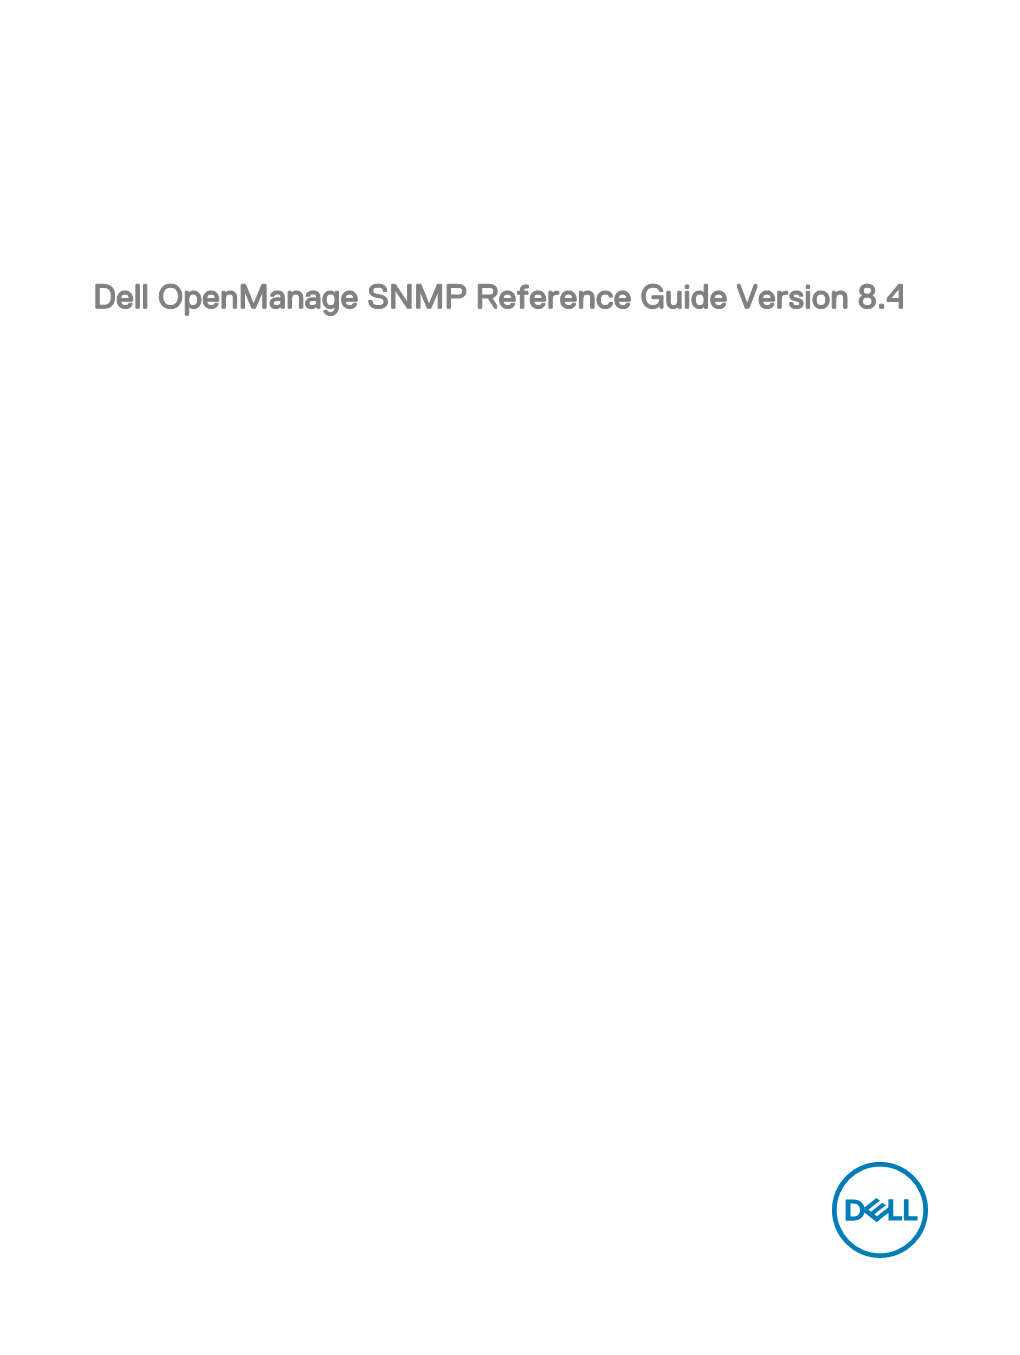 Dell Openmanage SNMP Reference Guide Version 8.4 Notes, Cautions, and Warnings